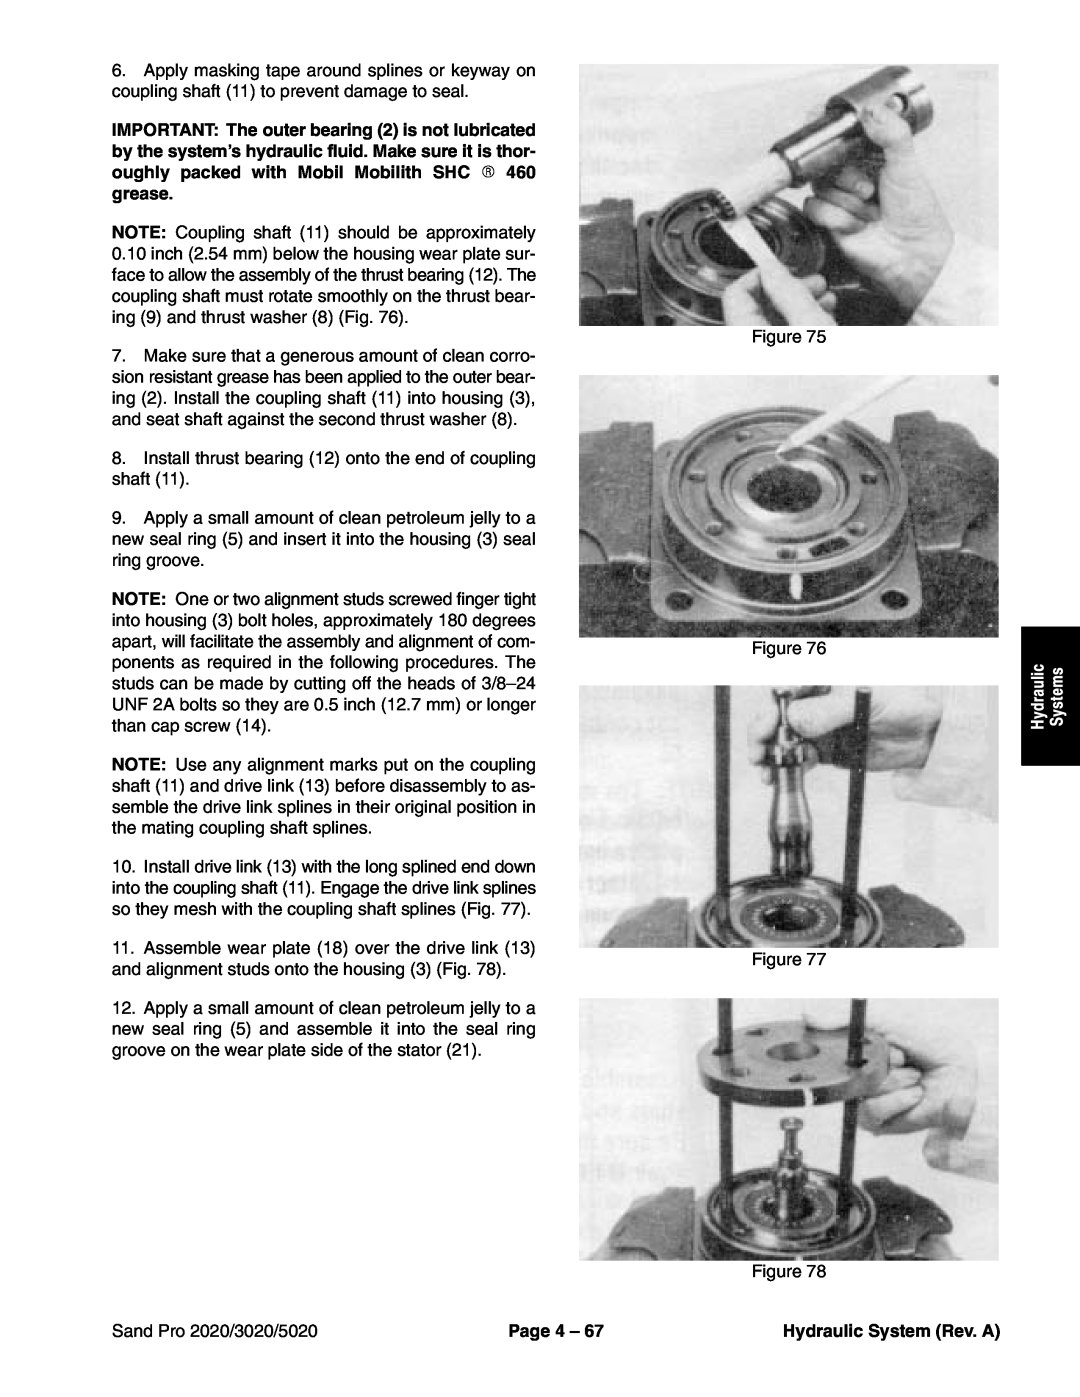 Toro service manual Systems, Sand Pro 2020/3020/5020, Page 4, Hydraulic System Rev. A 